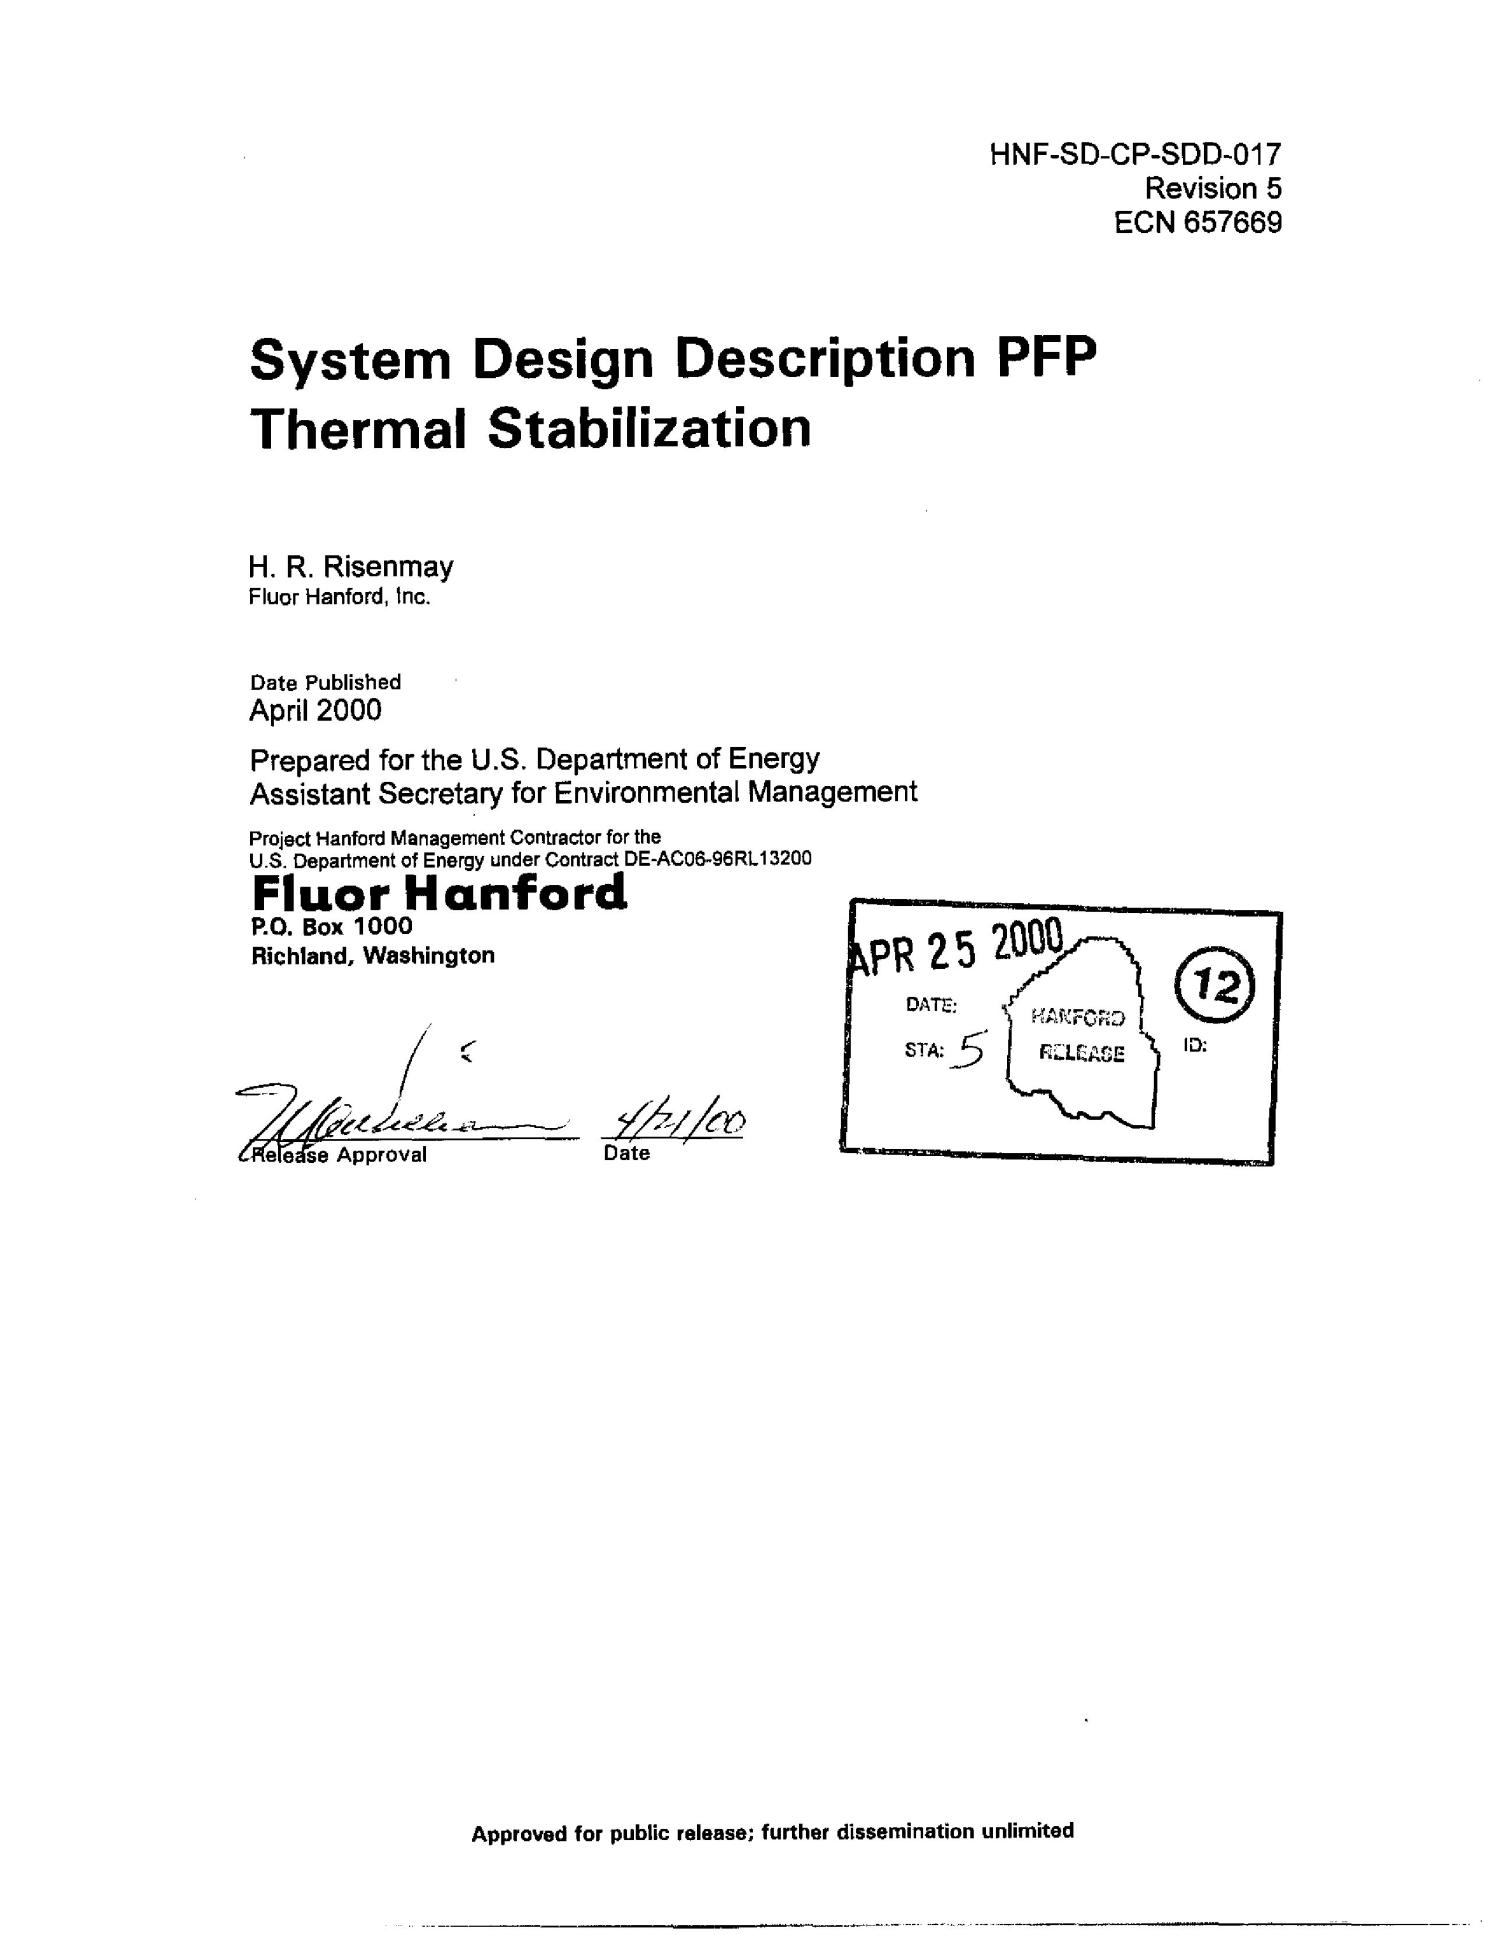 System Design Description PFP Thermal Stabilization
                                                
                                                    [Sequence #]: 4 of 44
                                                